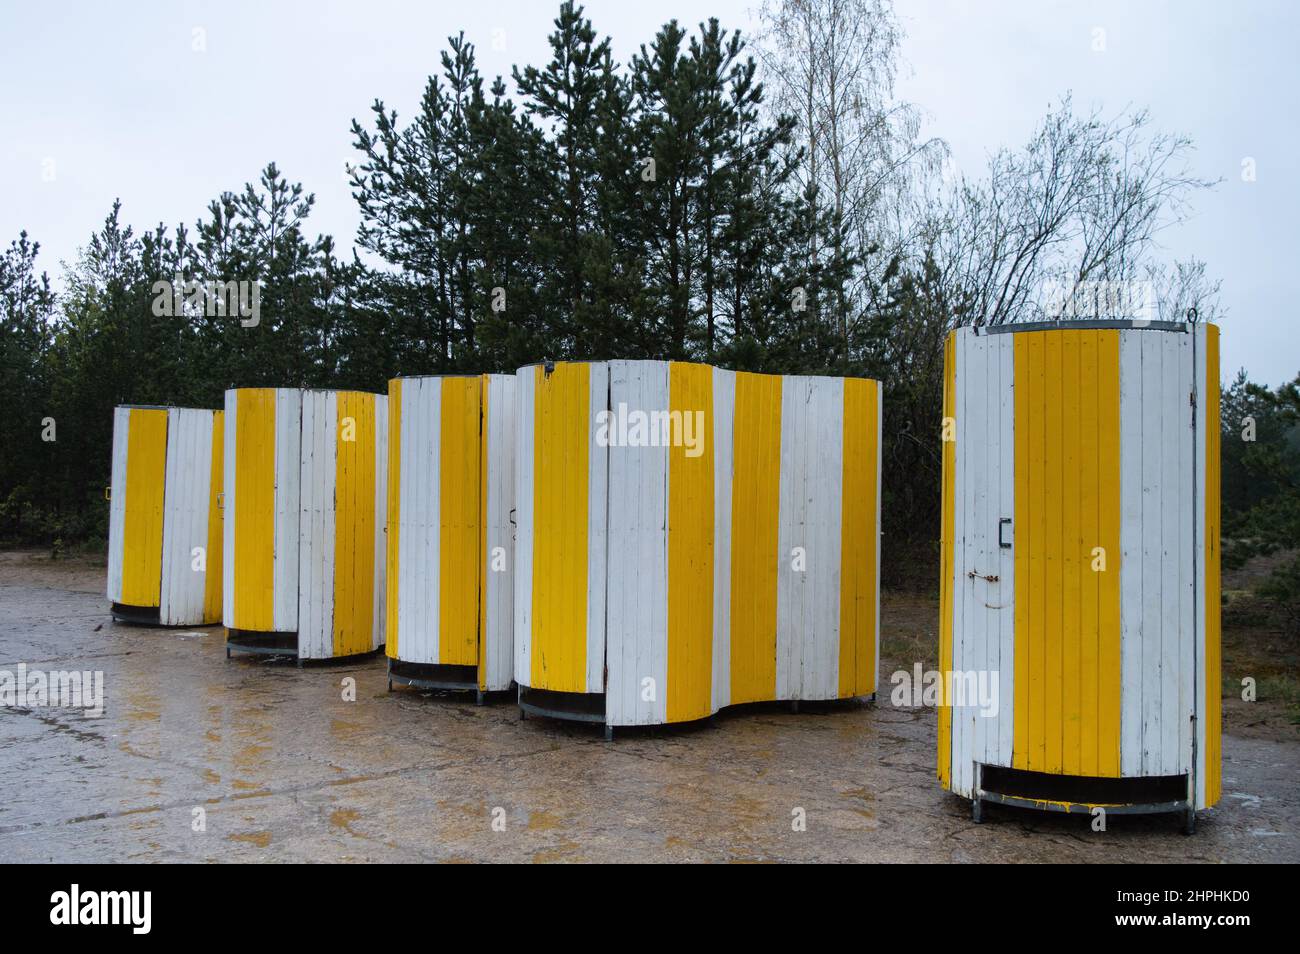 Strand toilets. Yellow movable strand toilets in a row Stock Photo